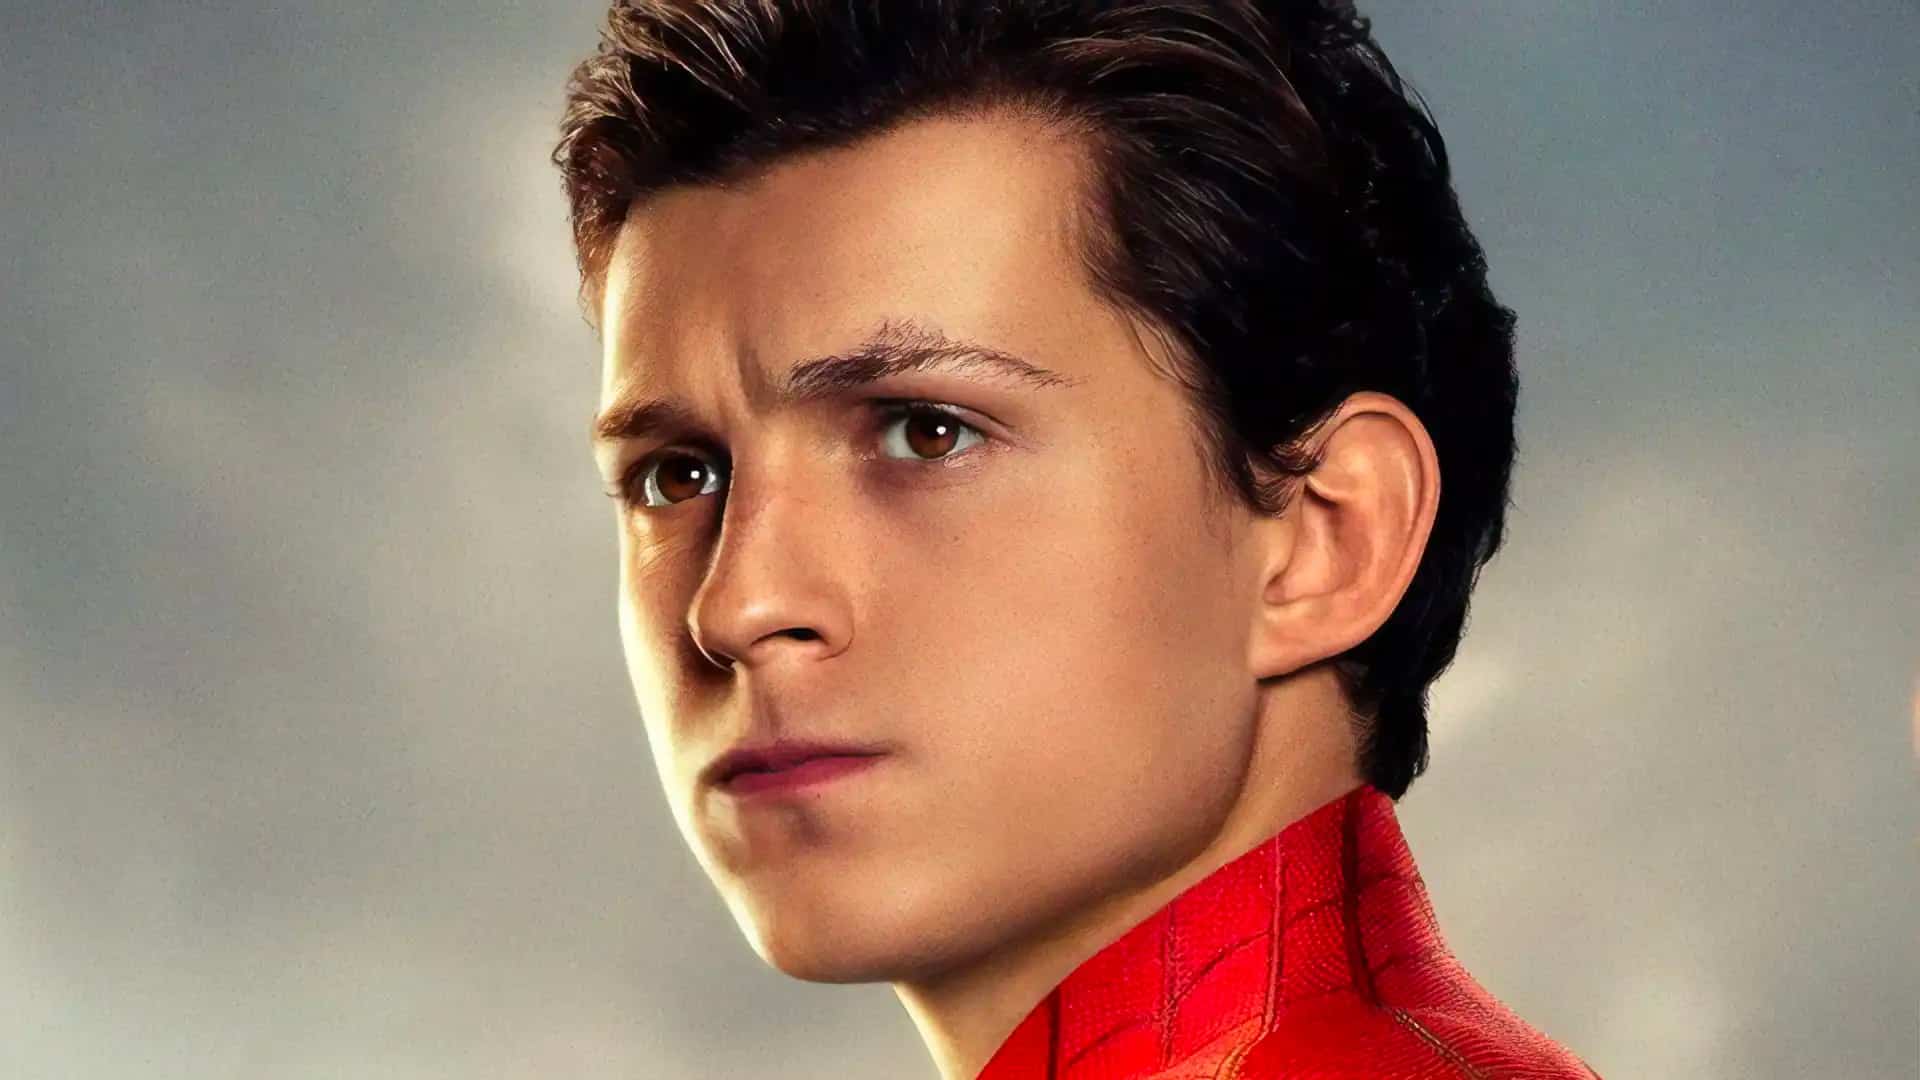 Spider-Man's Replacement in the MCU Confirmed for Marvel Phase 5